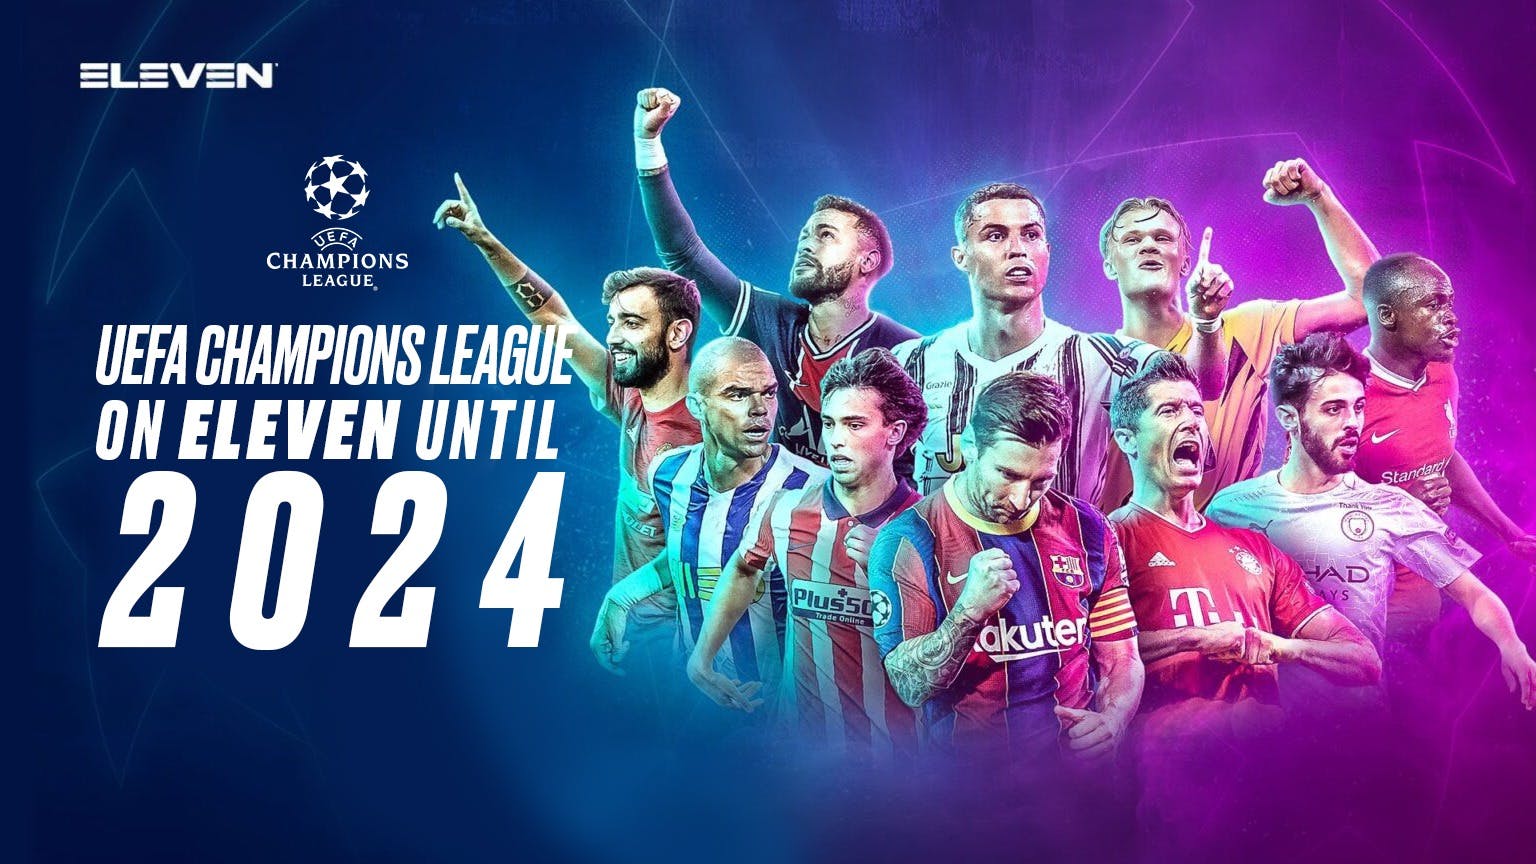 UEFA Champions League Will Return in August in Portugal - The New